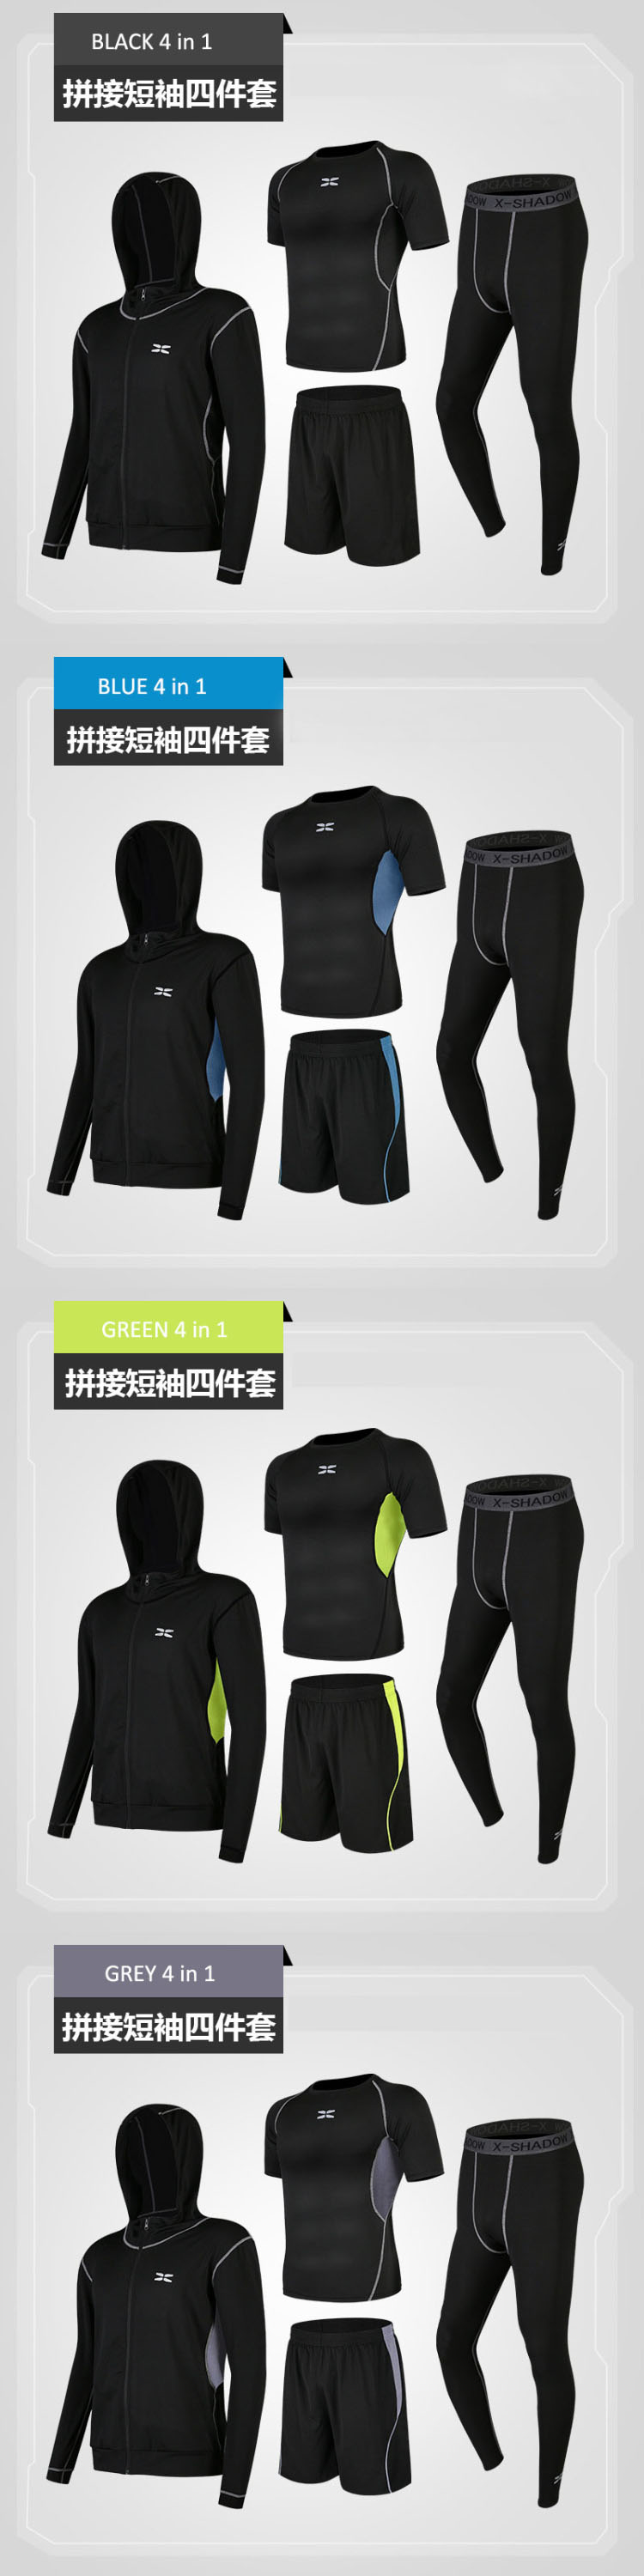 Wholesale 5pcs Men's Workout Clothes Outfit Fitness Apparel Gym Outdoor  Running Compression Pants Shirt Top Long Sleeve Jacket Manufacture and  Factory